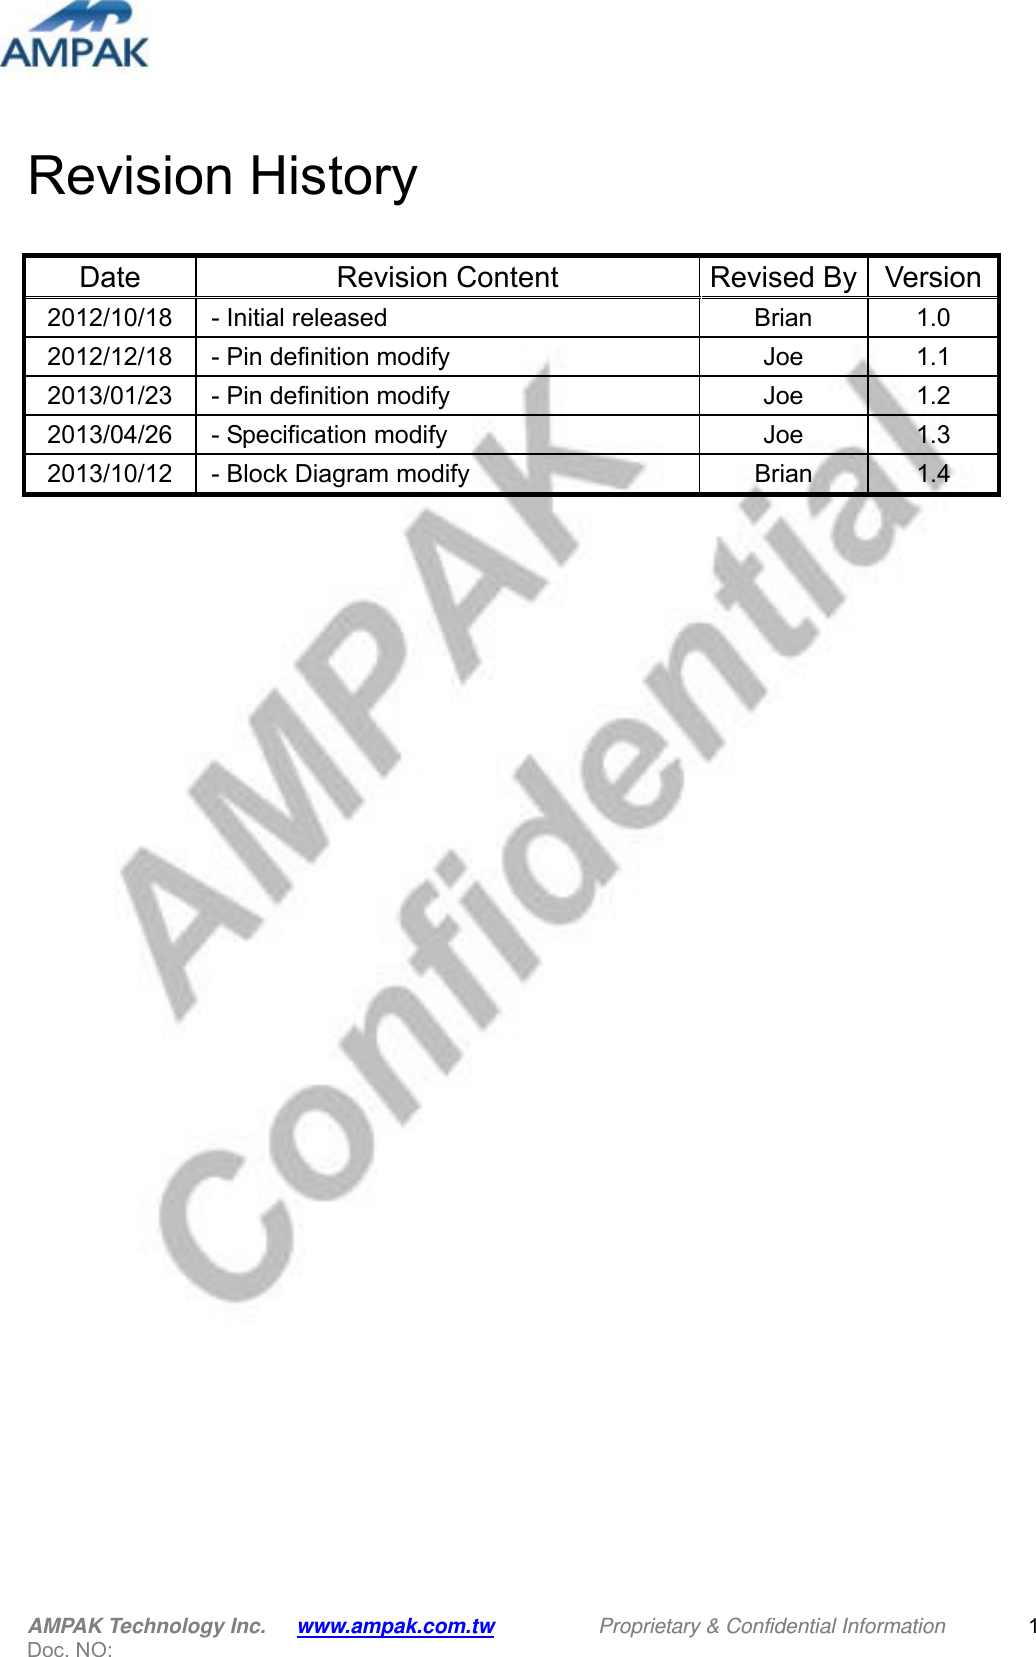  AMPAK Technology Inc.      www.ampak.com.tw          Proprietary &amp; Confidential Information   Doc. NO:                                                             1Revision History                                Date  Revision Content  Revised By  Version2012/10/18   - Initial released  Brian  1.0 2012/12/18   - Pin definition modify  Joe  1.1 2013/01/23   - Pin definition modify  Joe  1.2 2013/04/26   - Specification modify  Joe  1.3 2013/10/12   - Block Diagram modify  Brian  1.4 